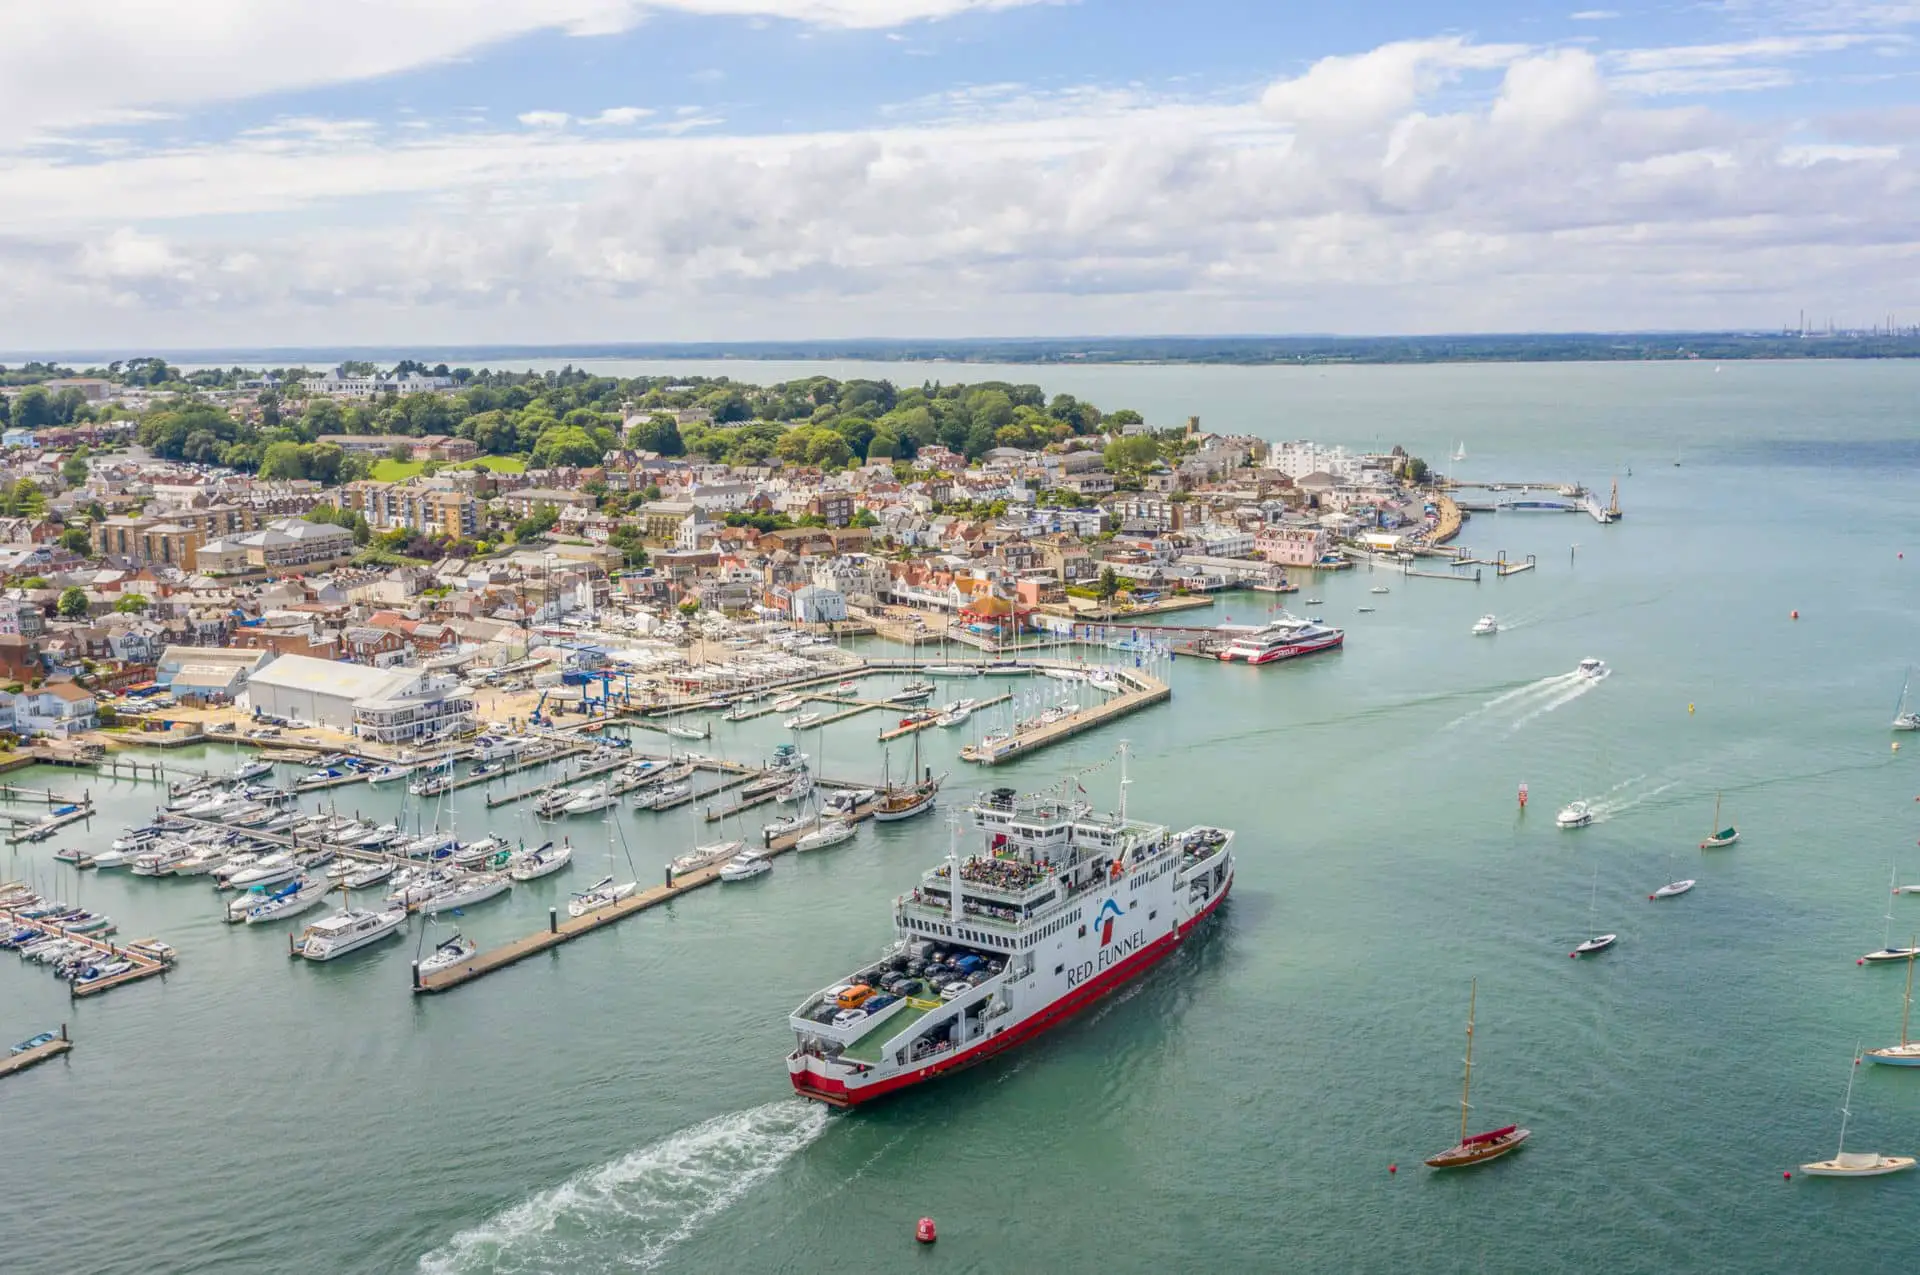 Aerial shot of Red Funnel ferry leaving Cowes